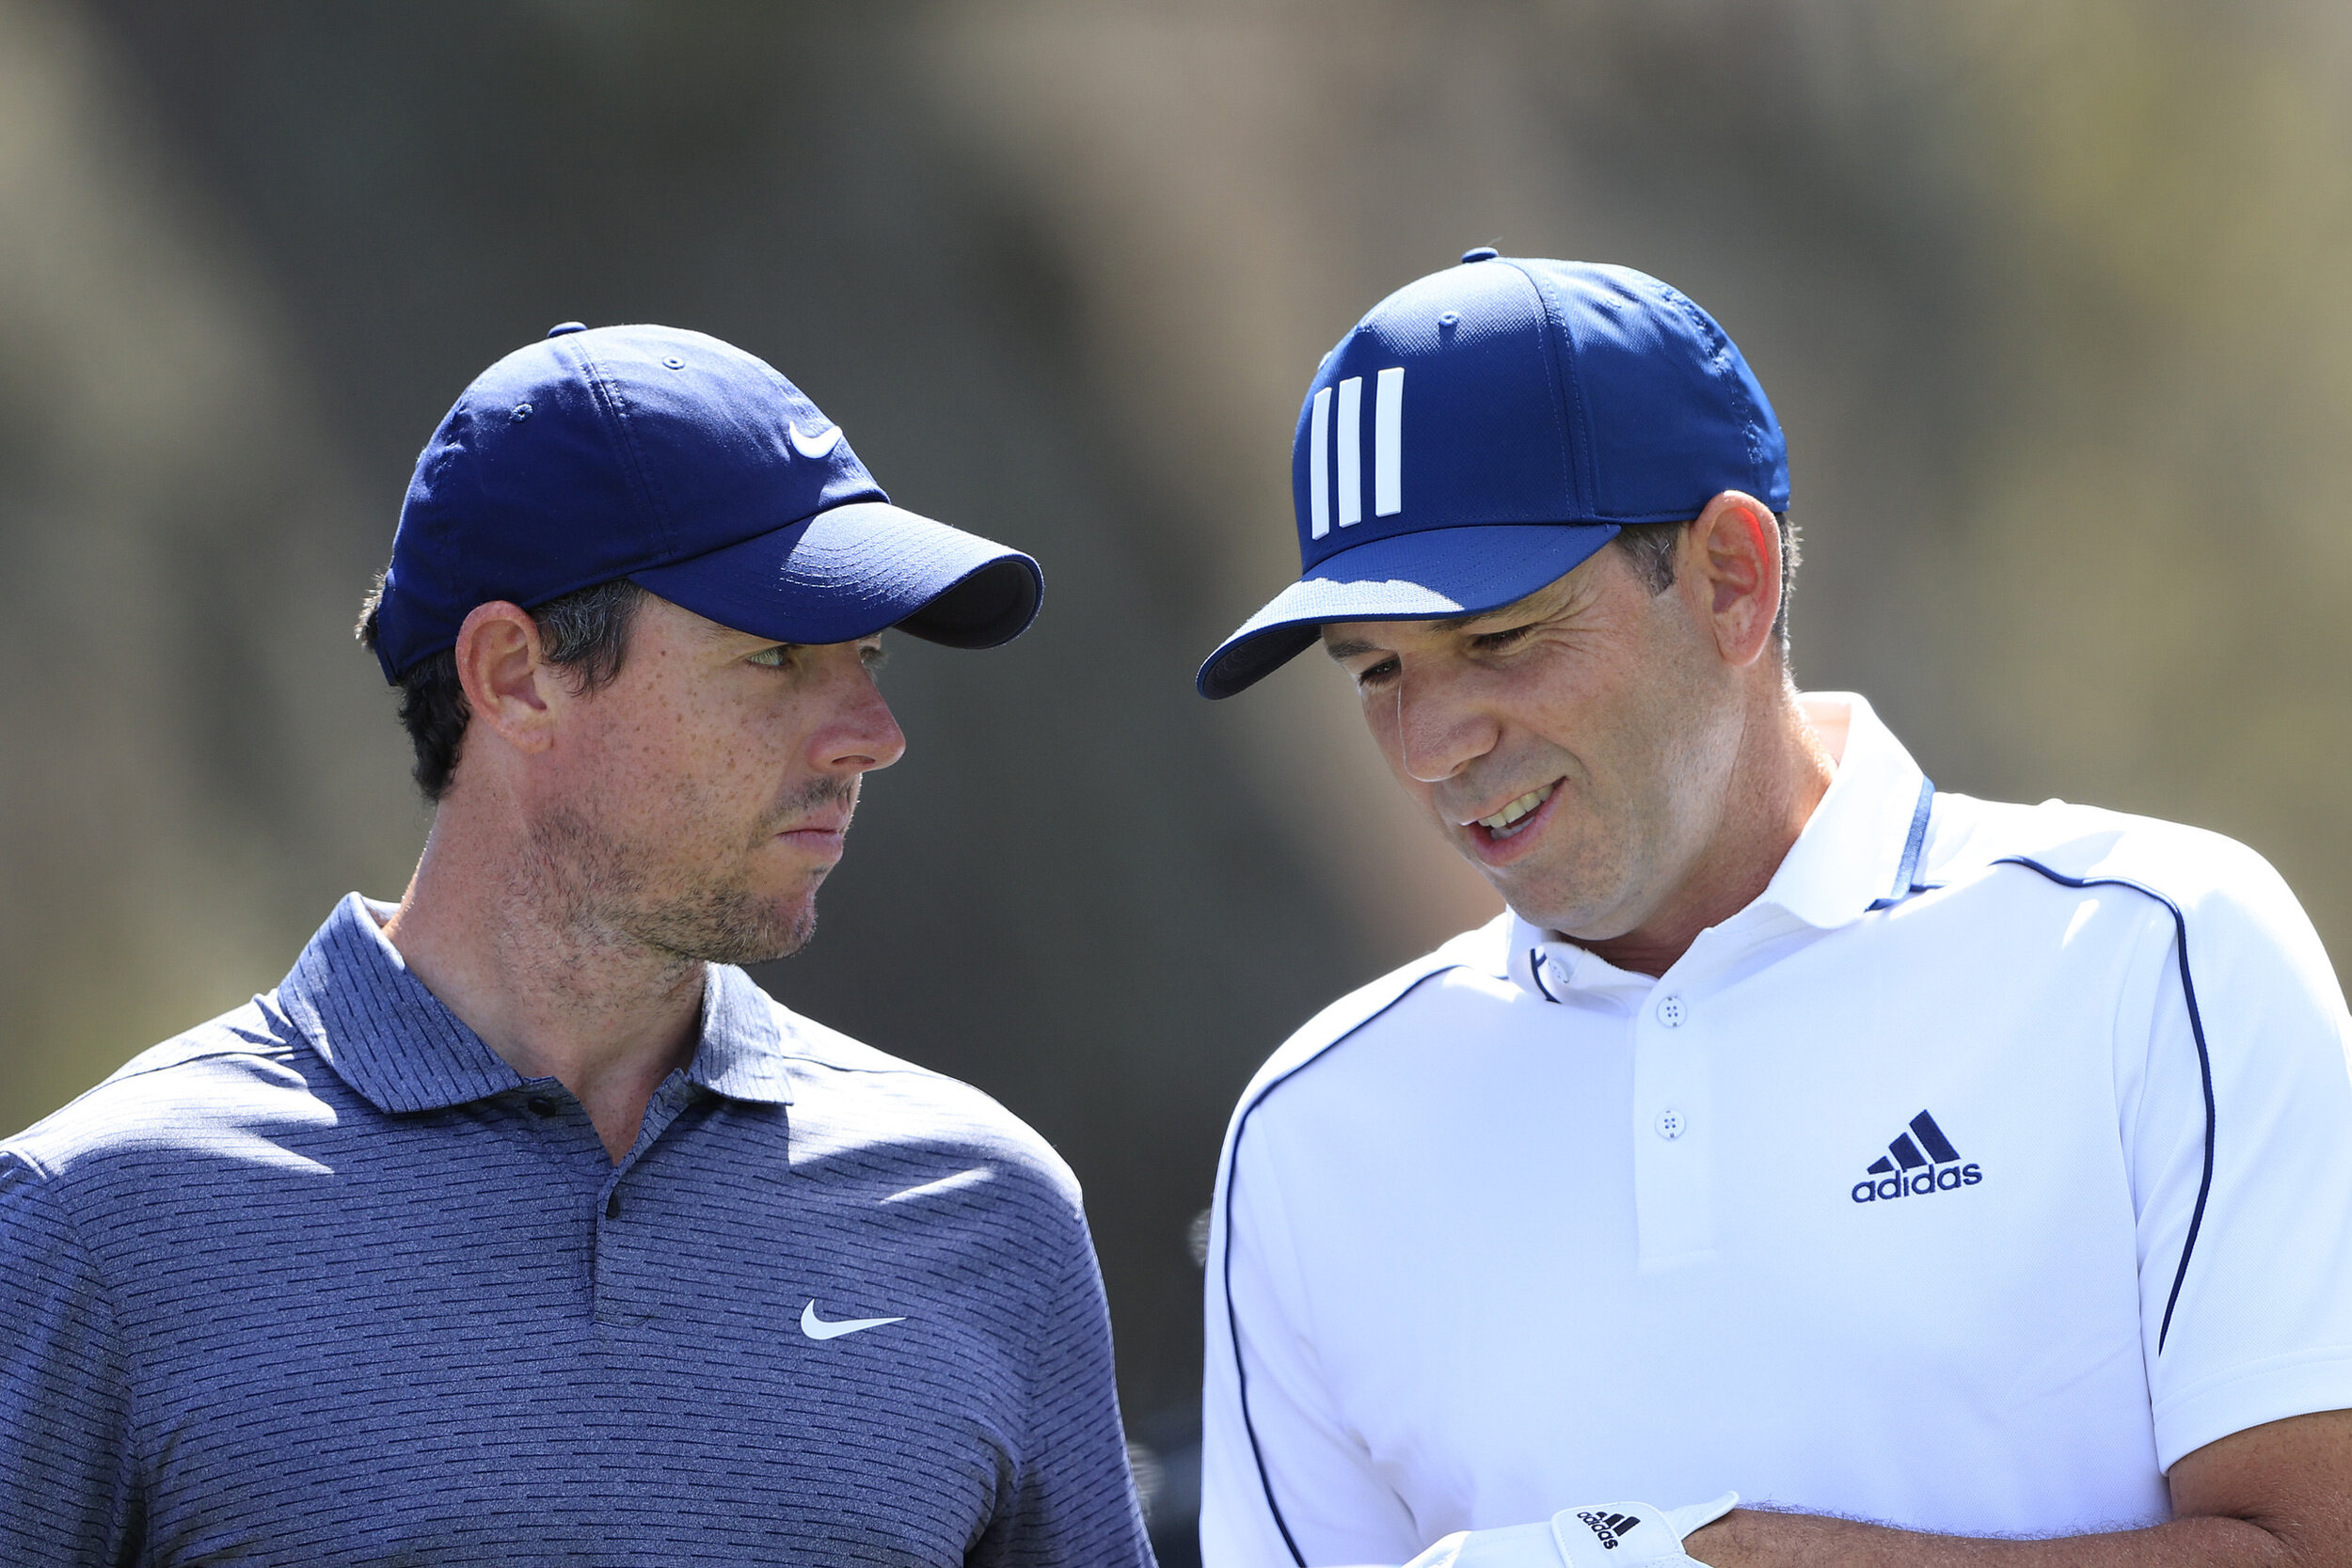  PONTE VEDRA BEACH, FLORIDA - MARCH 11: Rory McIlroy of Northern Ireland talks to Sergio Garcia of Spain during the first round of THE PLAYERS Championship on THE PLAYERS Stadium Course at TPC Sawgrass on March 11, 2021 in Ponte Vedra Beach, Florida.